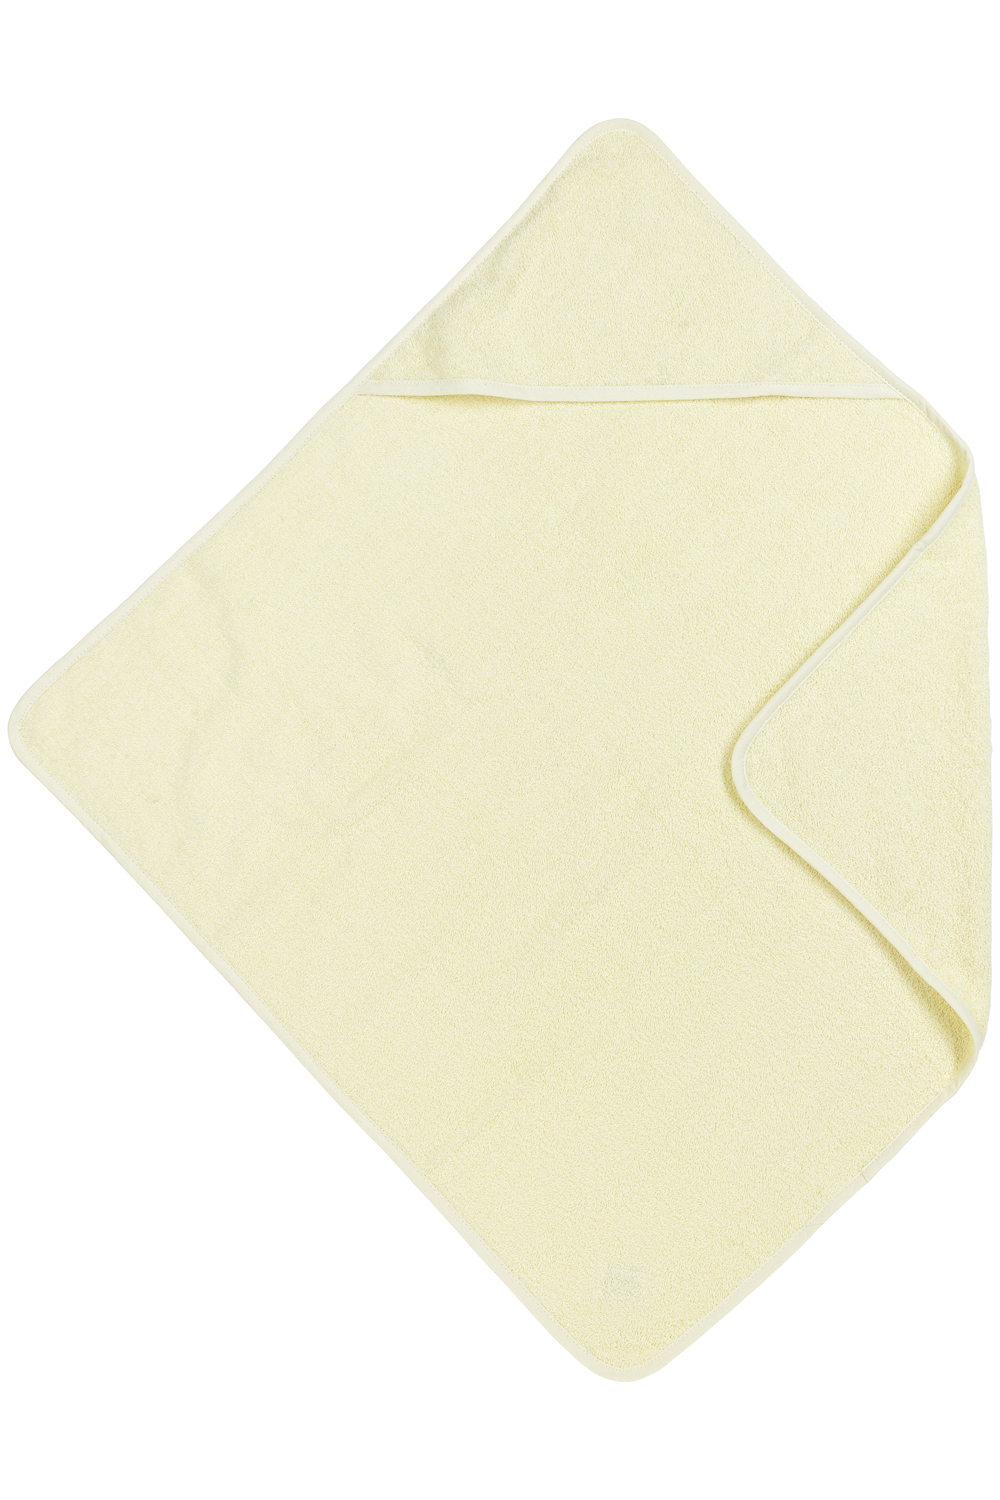 Kapuzentuch Frottee - Soft Yellow - 75x75cm